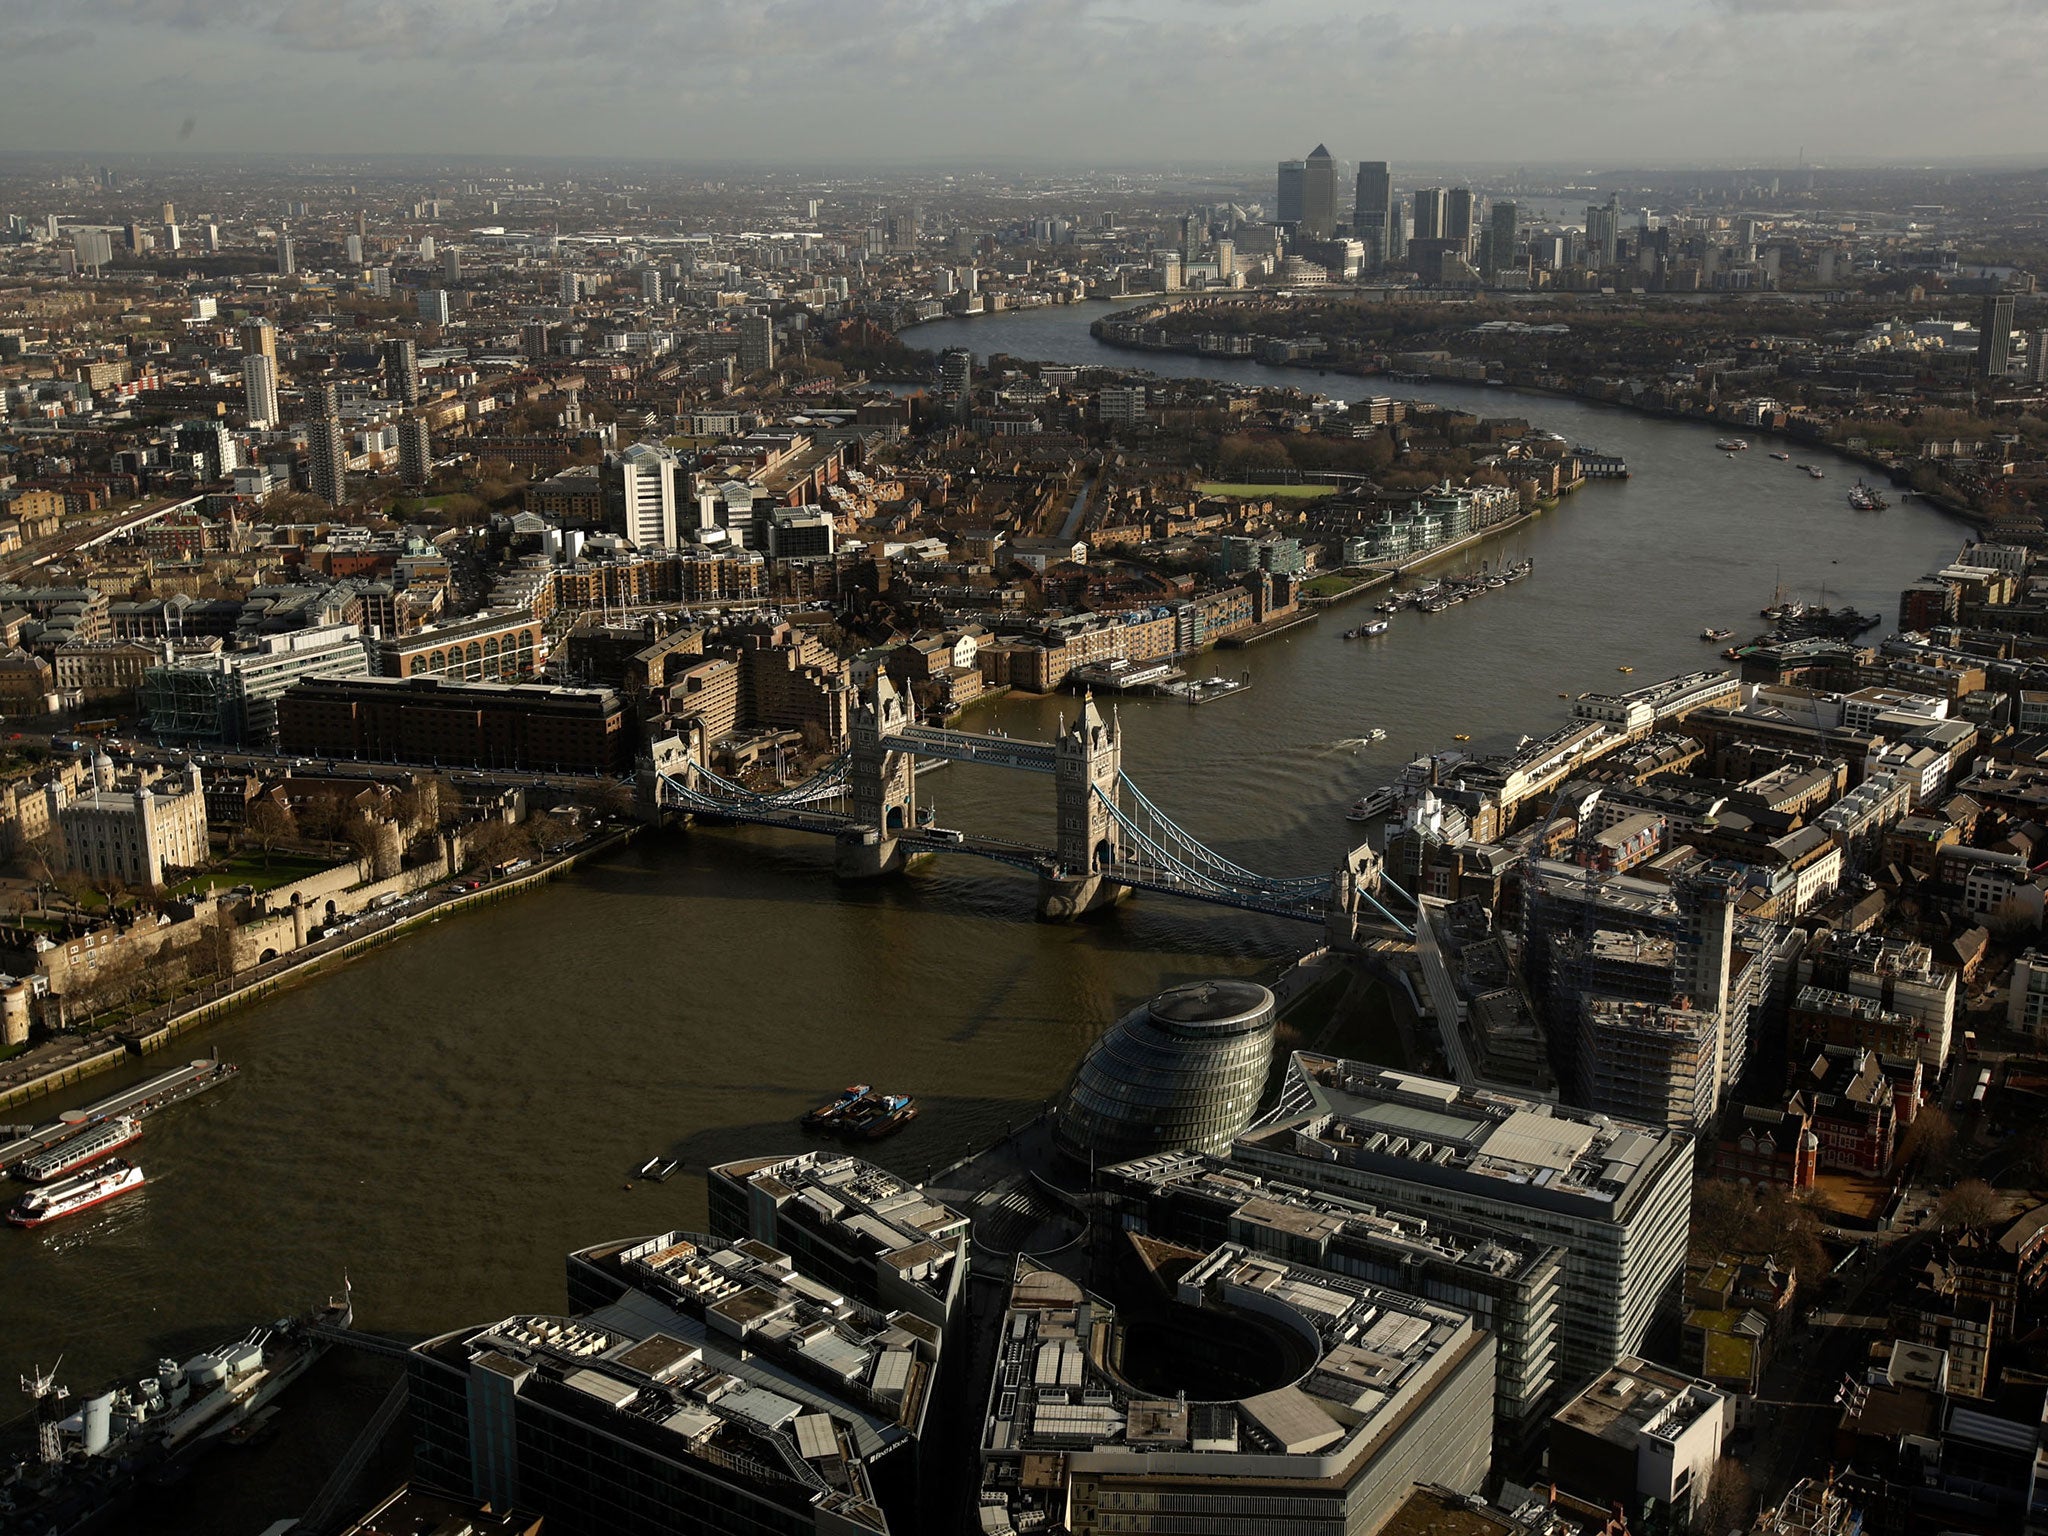 Landed a scheme in investment banking? London's the place to be then